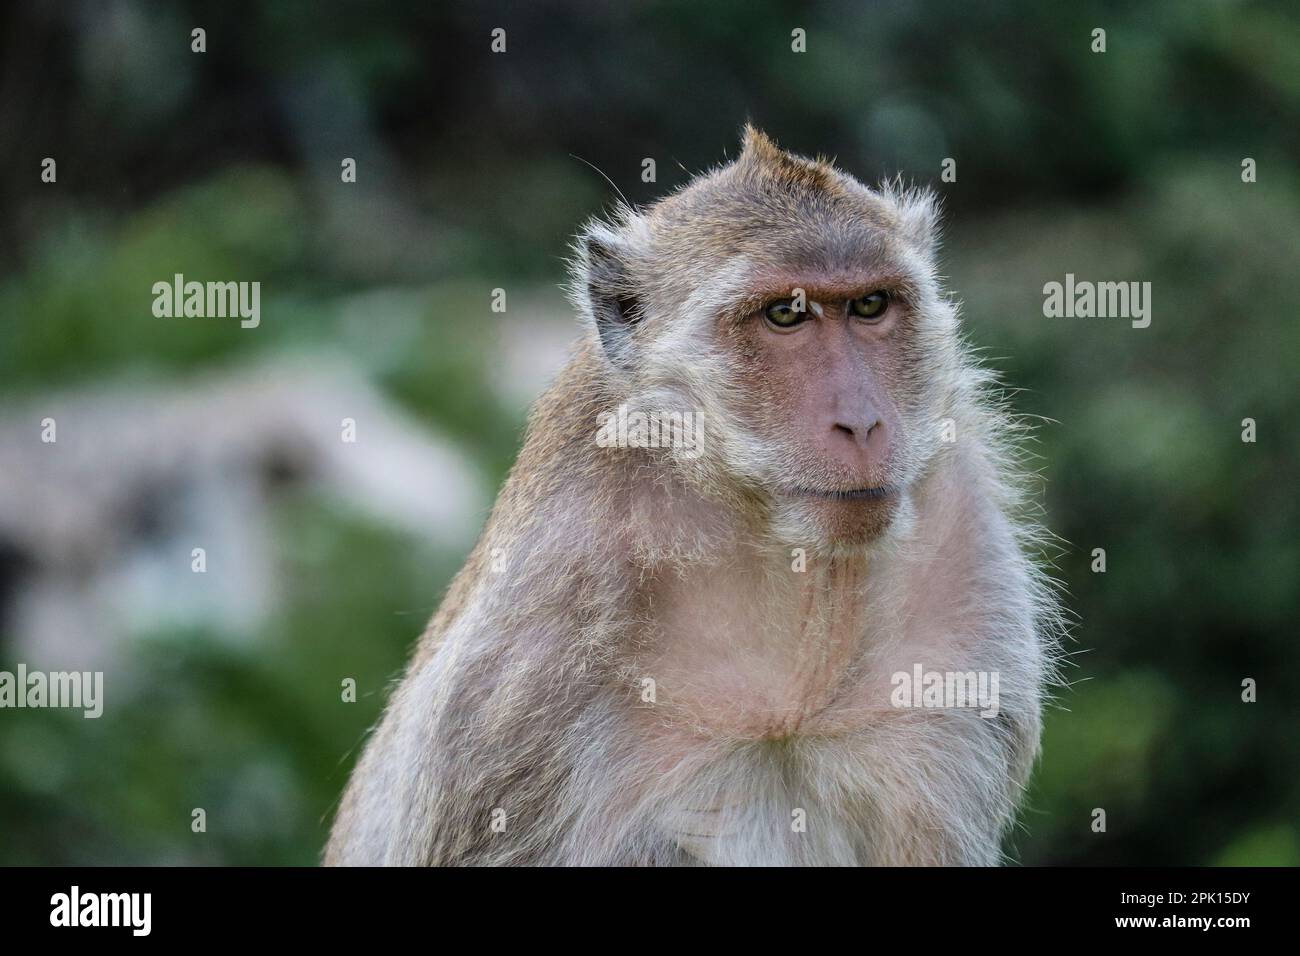 The face of an adult macaque. Monkeys in the wild. Stock Photo